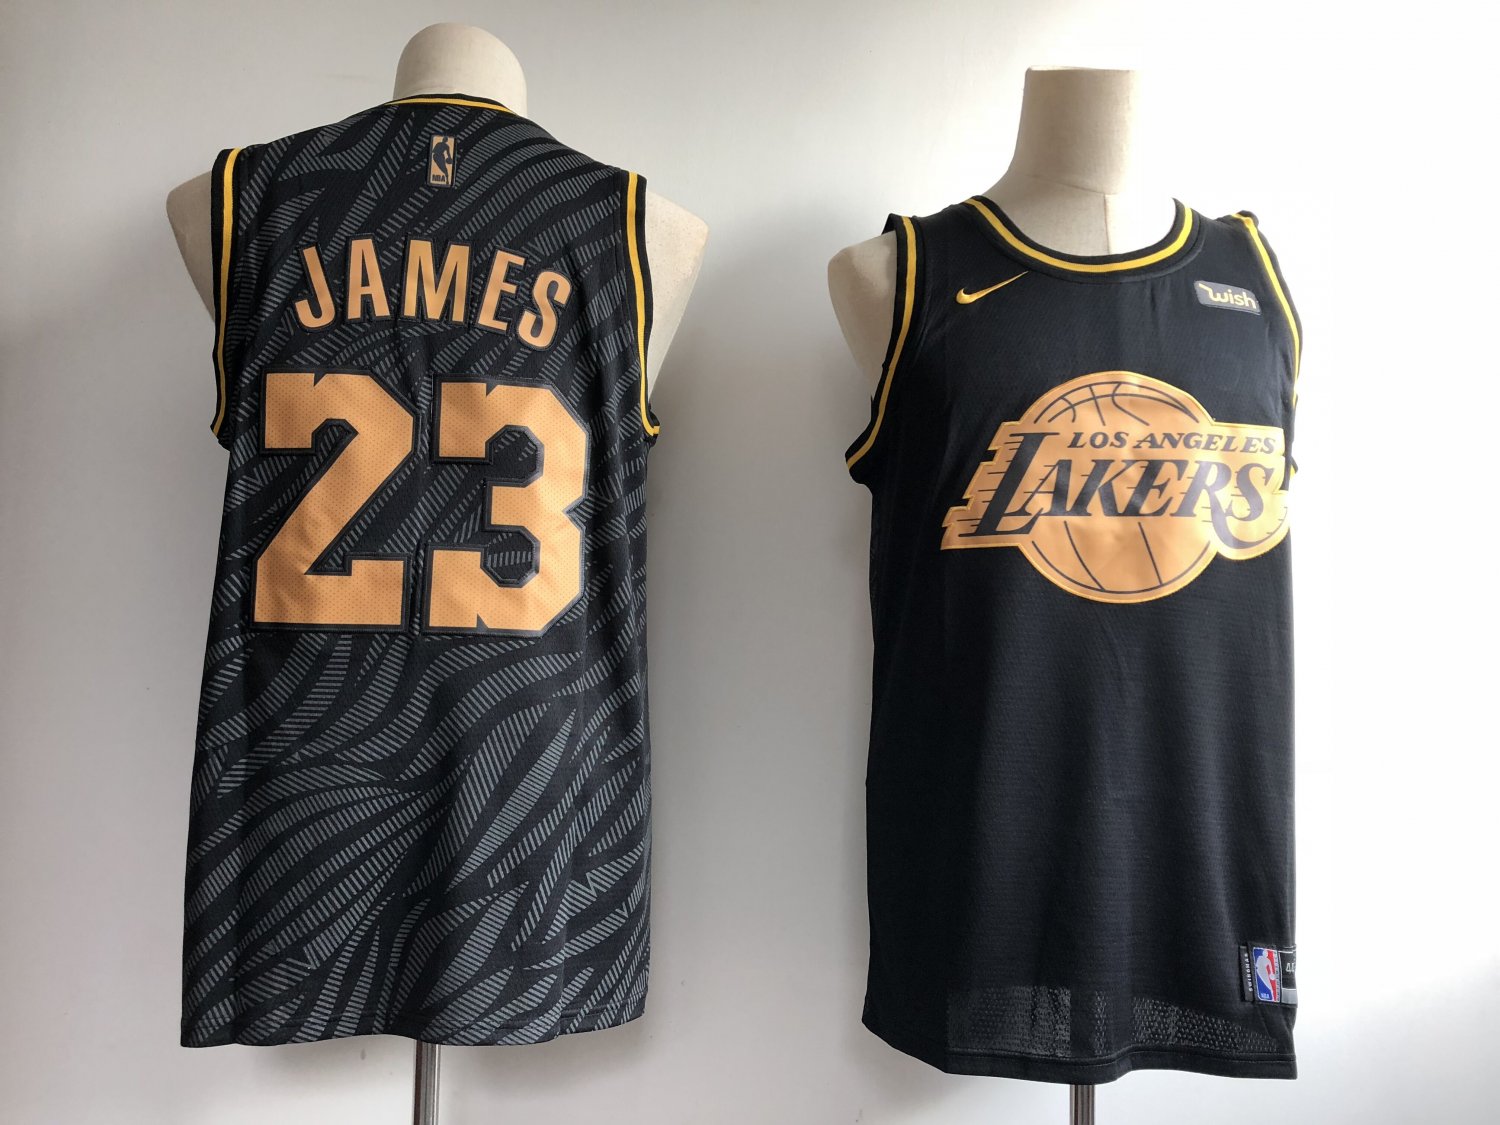 lebron james lakers jersey black and gold